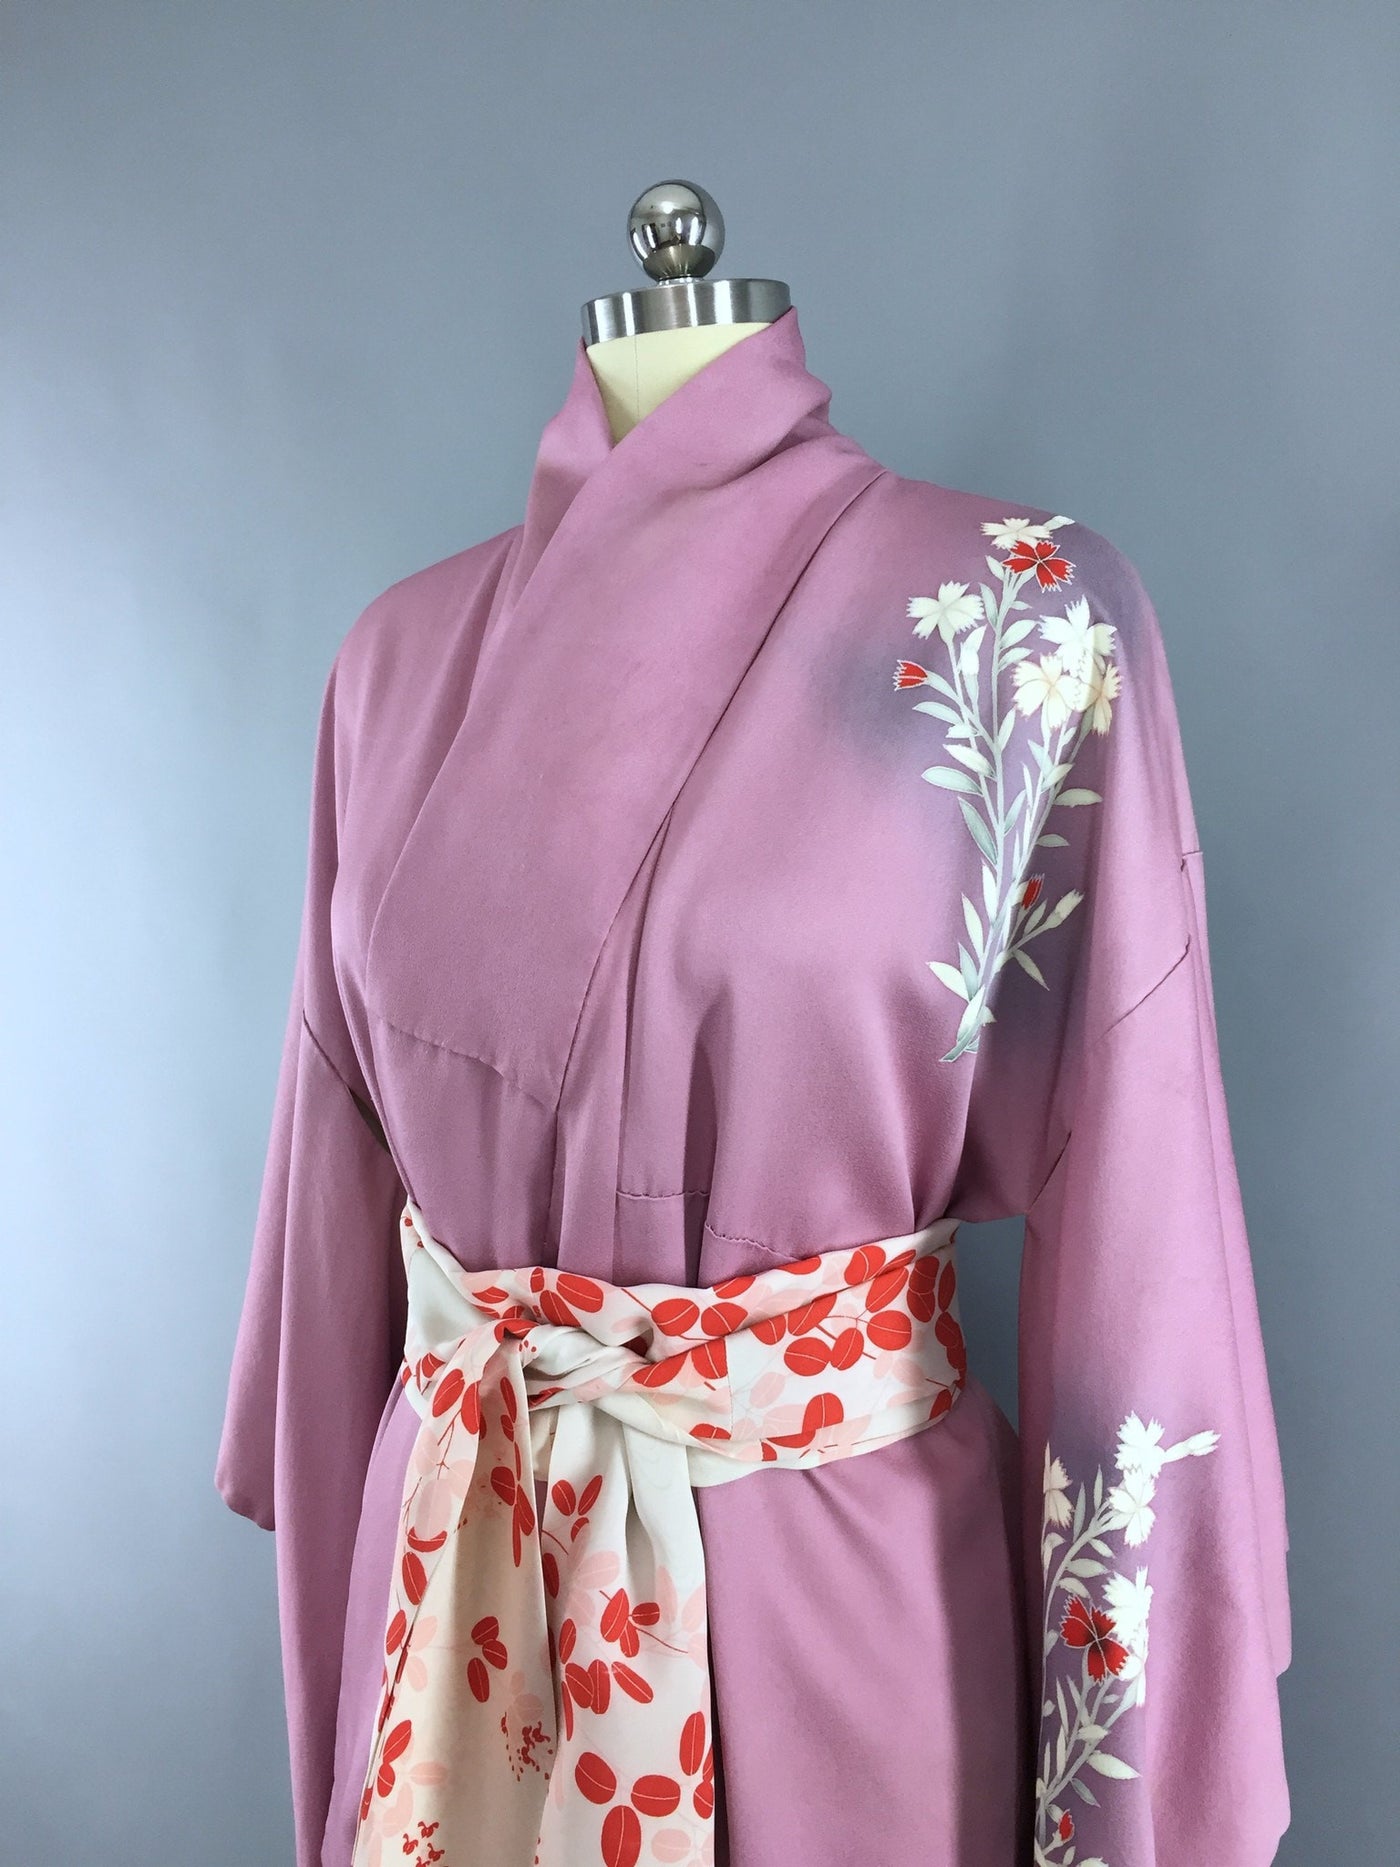 1950s Vintage Kimono Robe with Lavender and Red Floral Print - ThisBlueBird